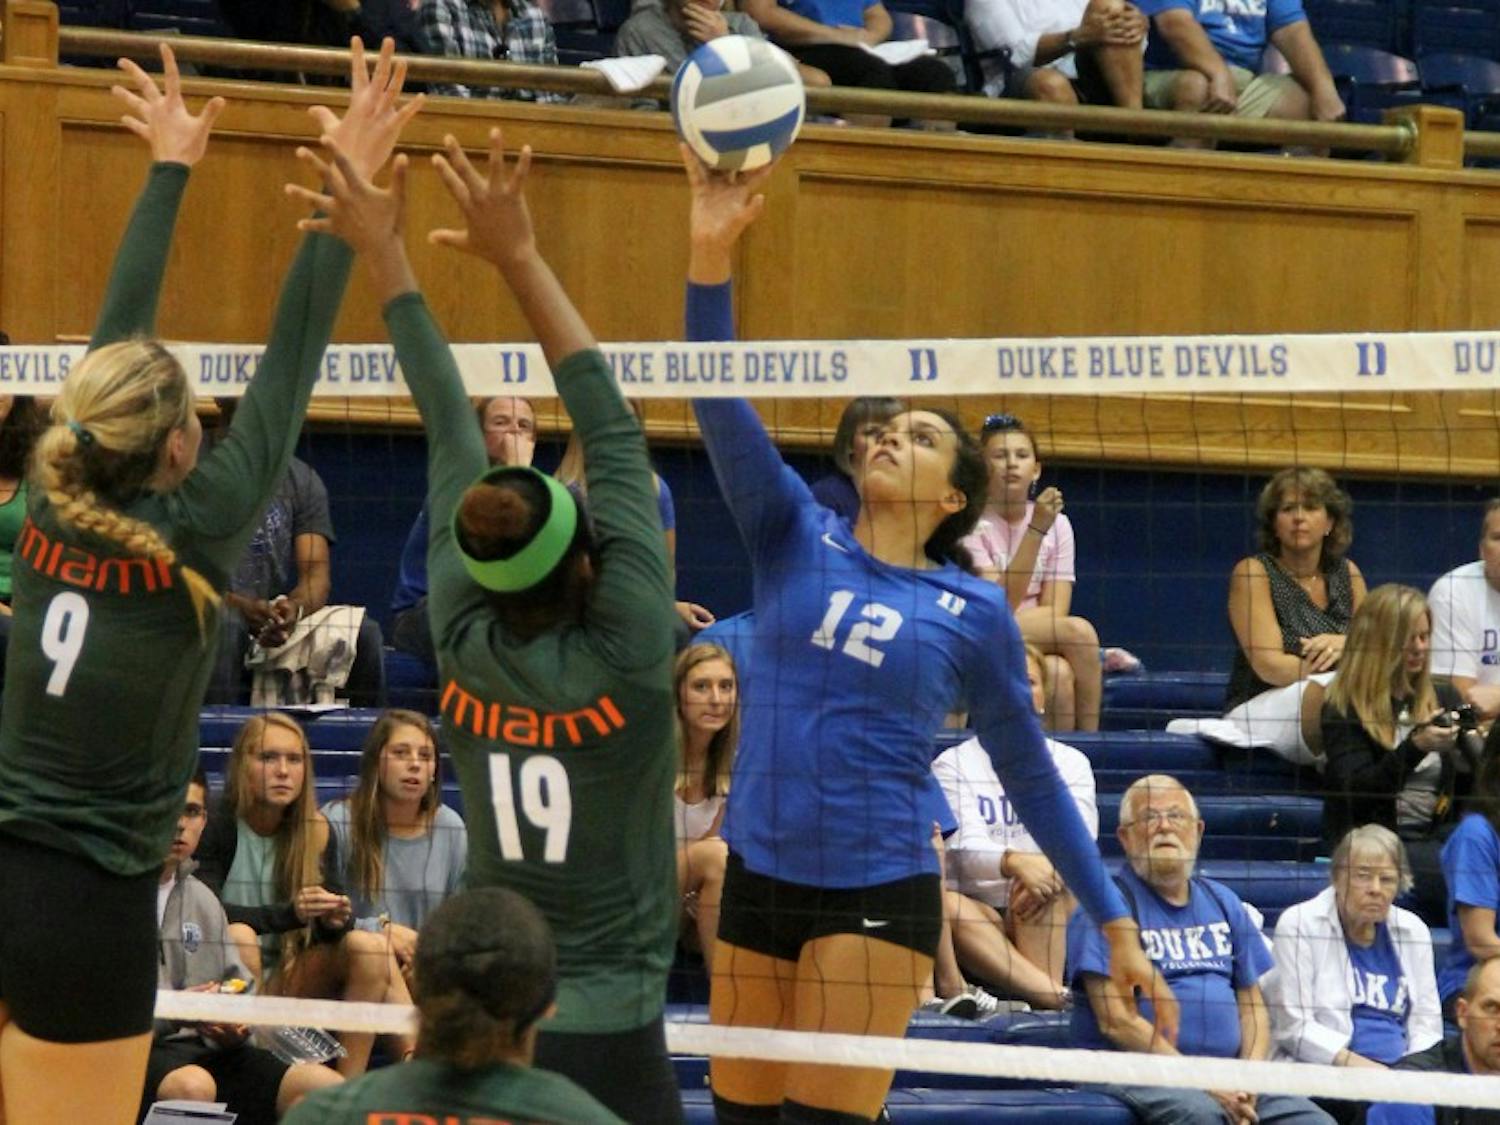 Junior outside hitter Breanna Atkinson may return to the court Friday for the first time since Nov. 2.